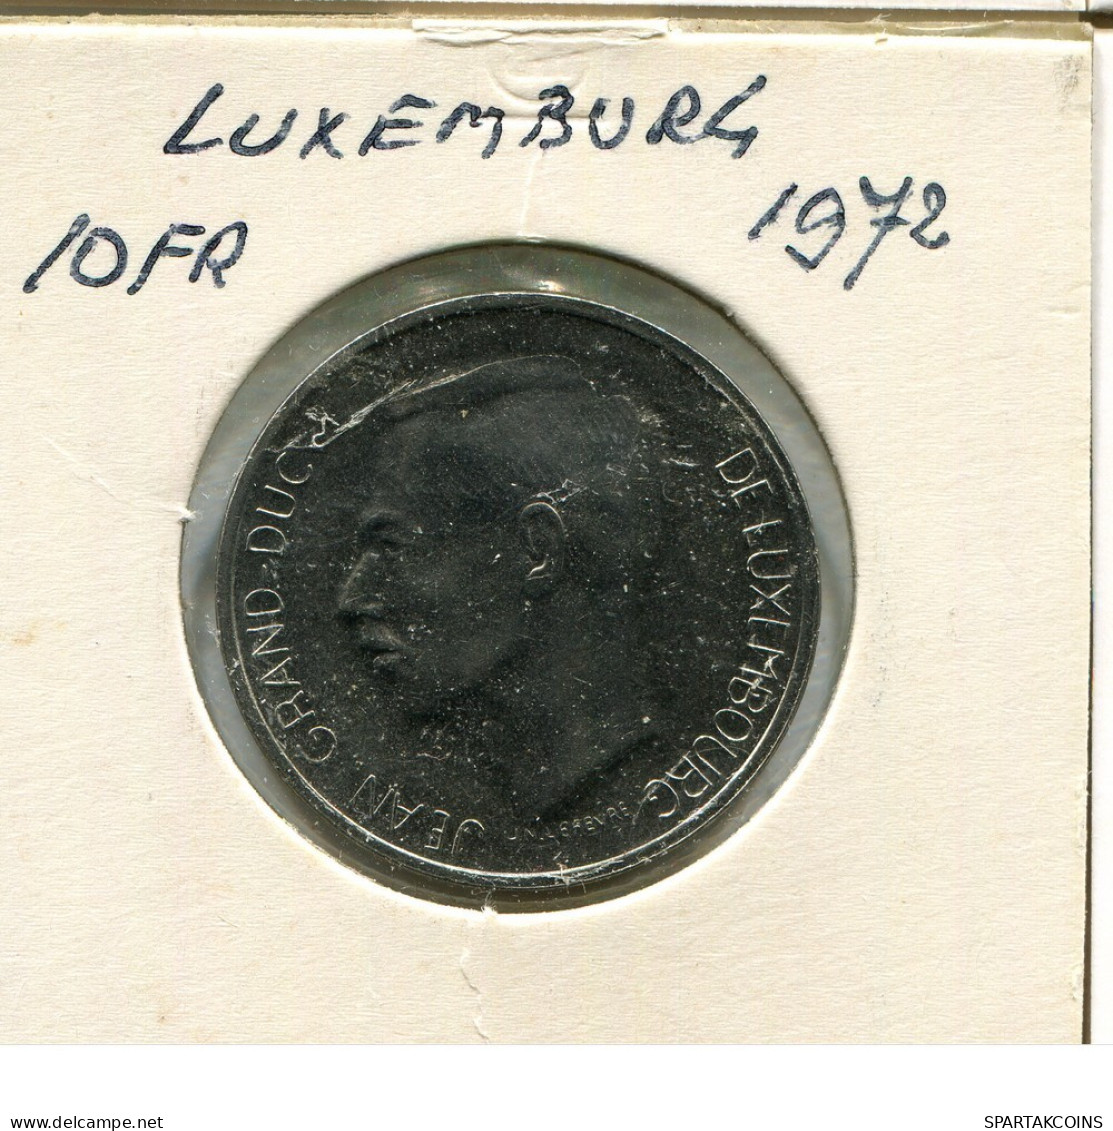 10 FRANCS 1972 LUXEMBOURG Coin #AR687.U.A - Luxembourg